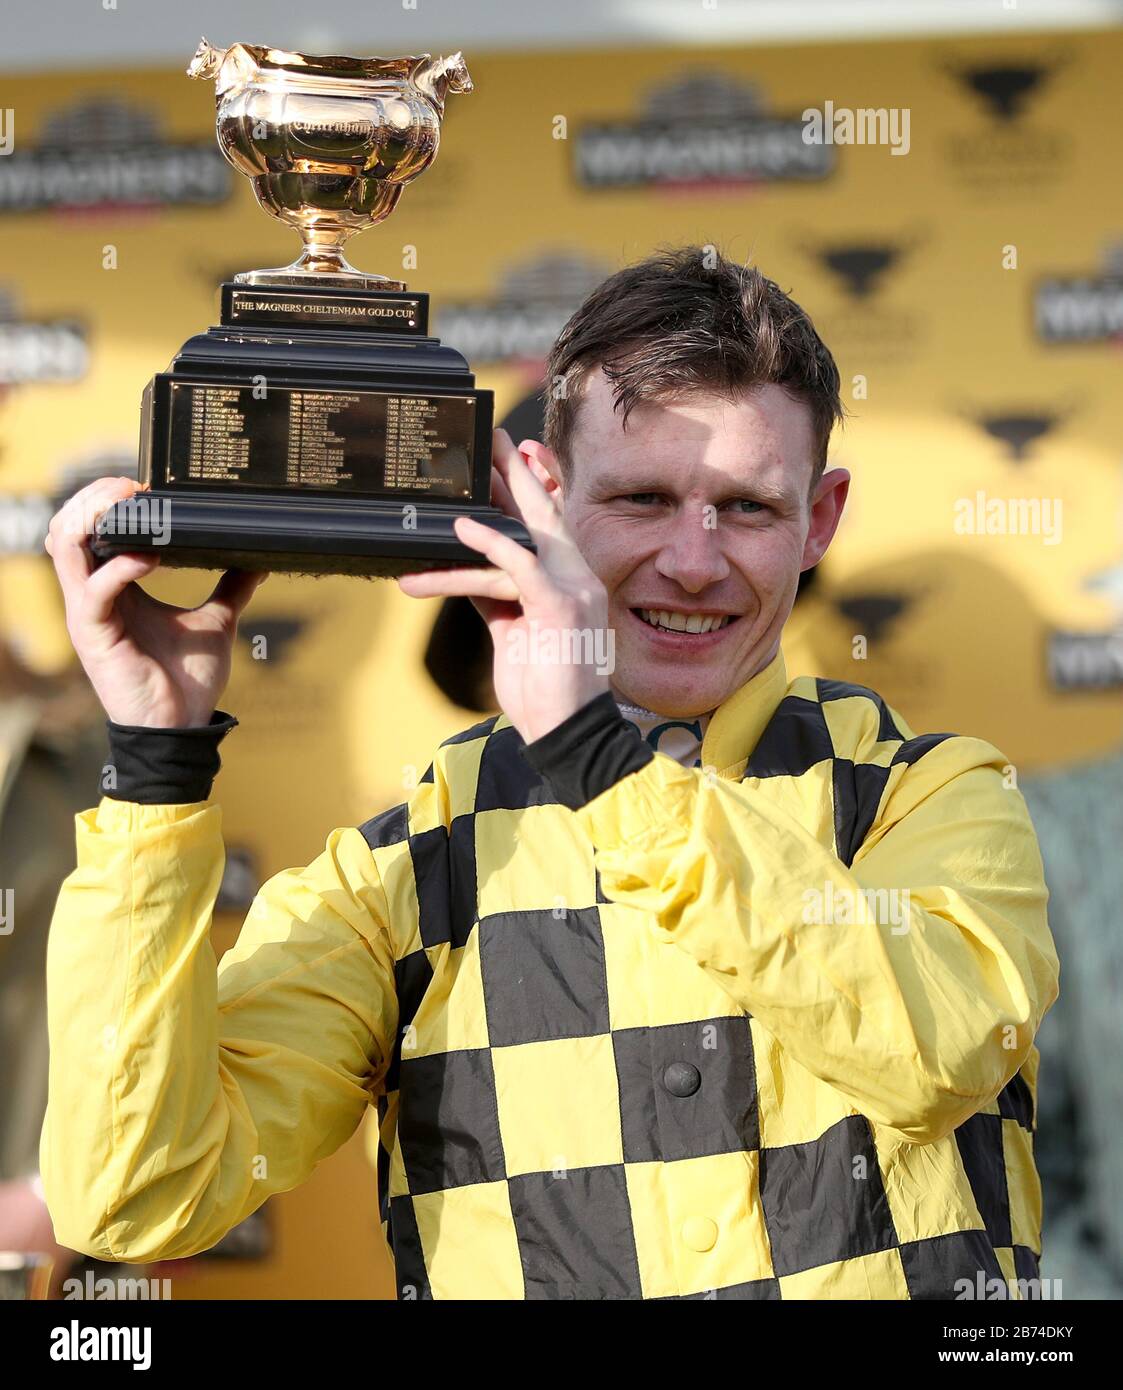 Jockey Paul Townend celebrates after winning the Magners Cheltenham Gold Cup Chase during day four of the Cheltenham Festival at Cheltenham Racecourse. Stock Photo